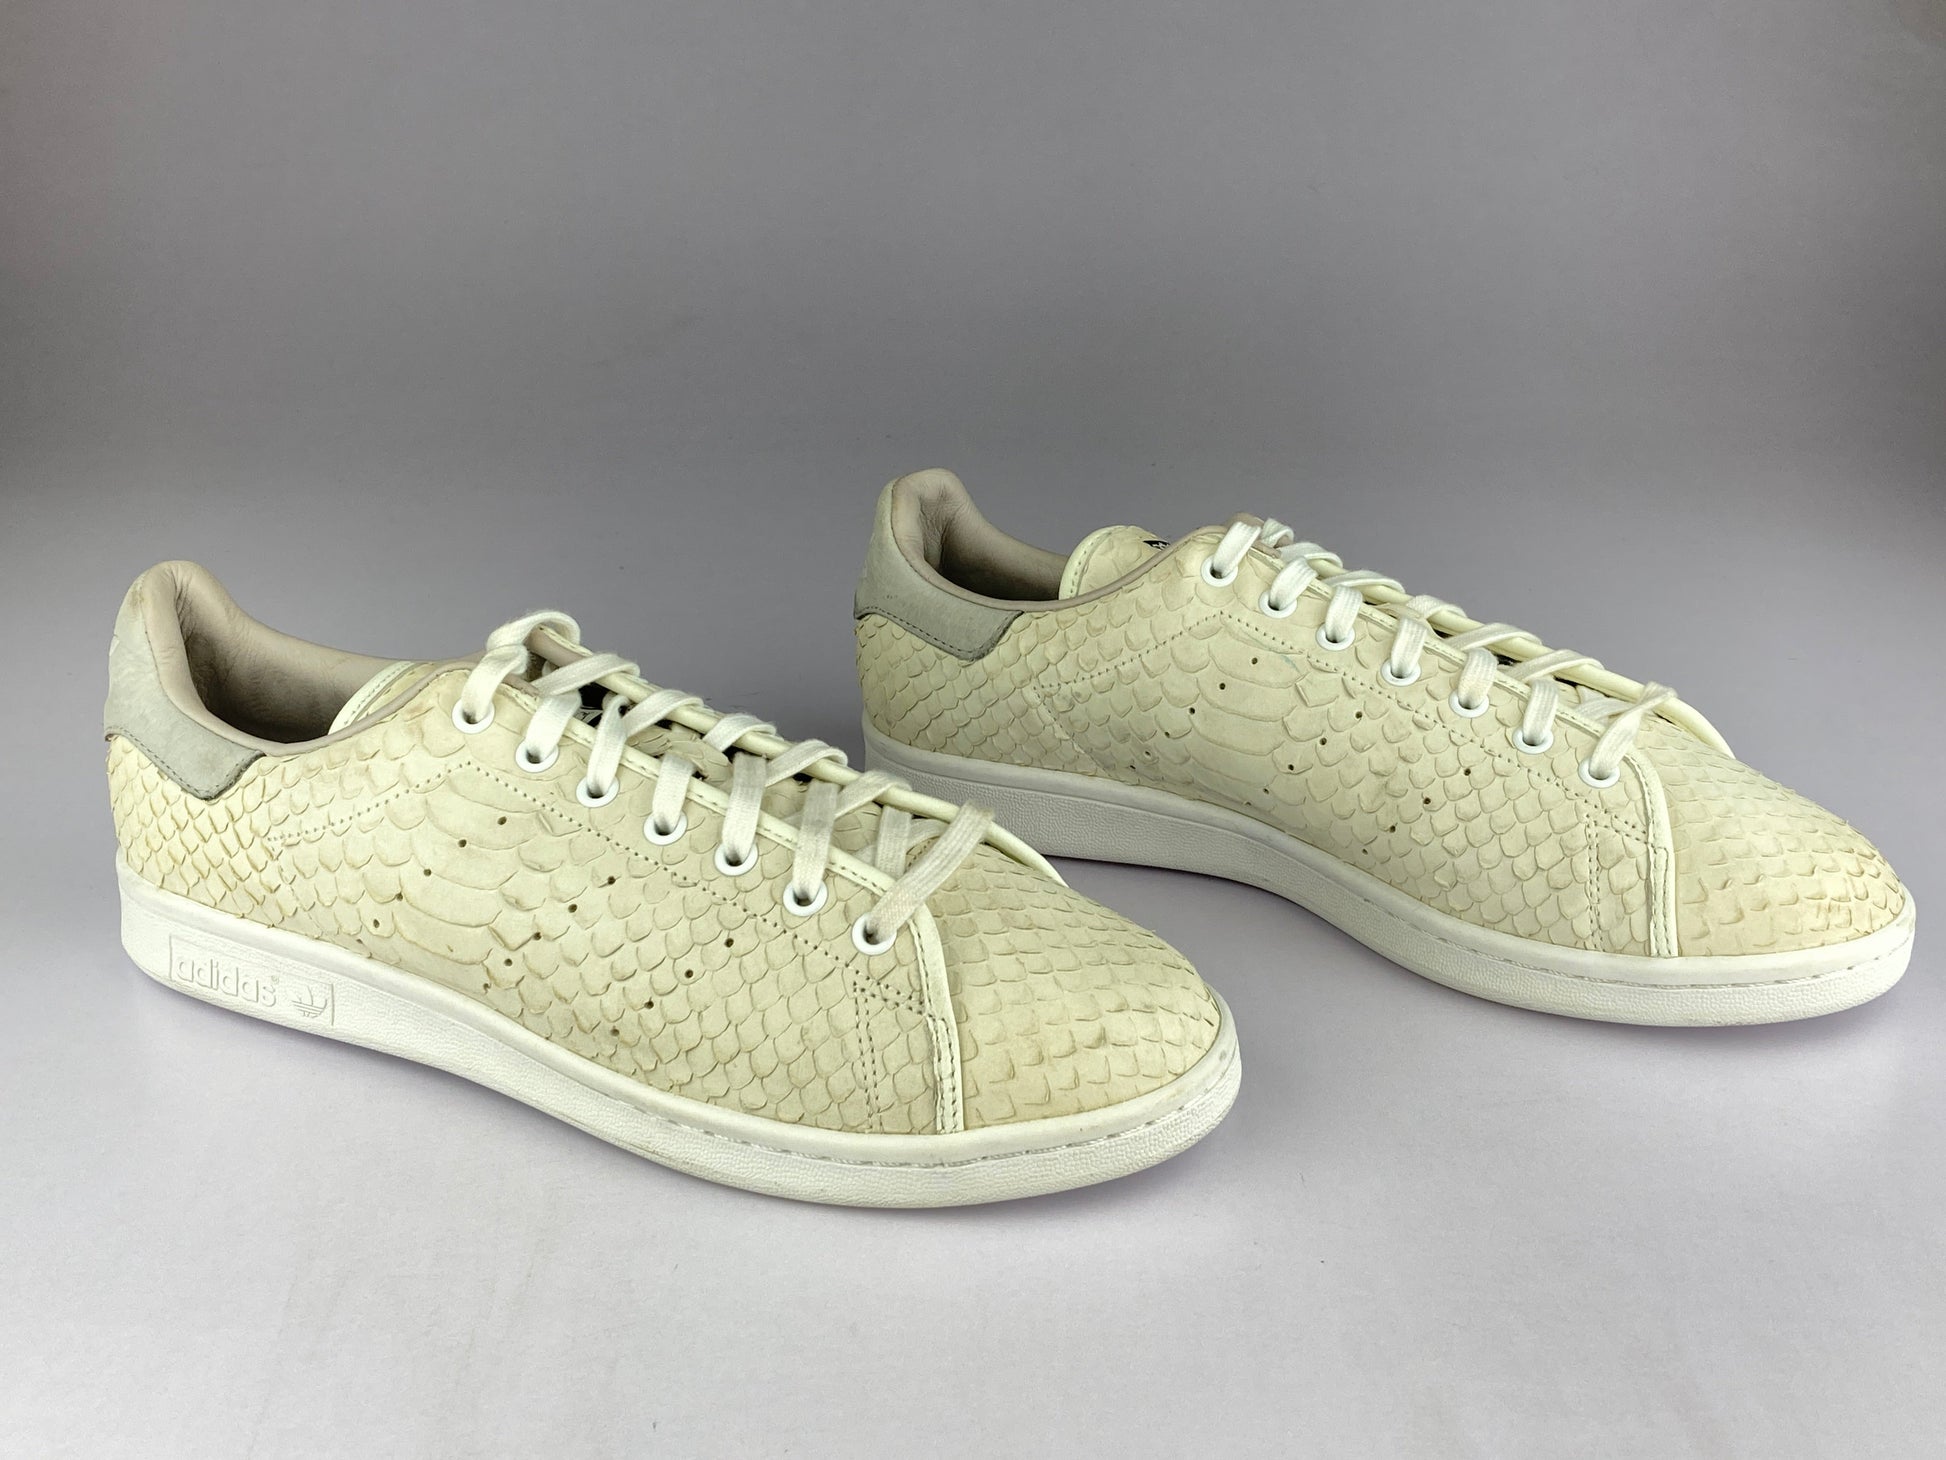 adidas Stan Smith Deconstructed Flat 'White Python' s80504